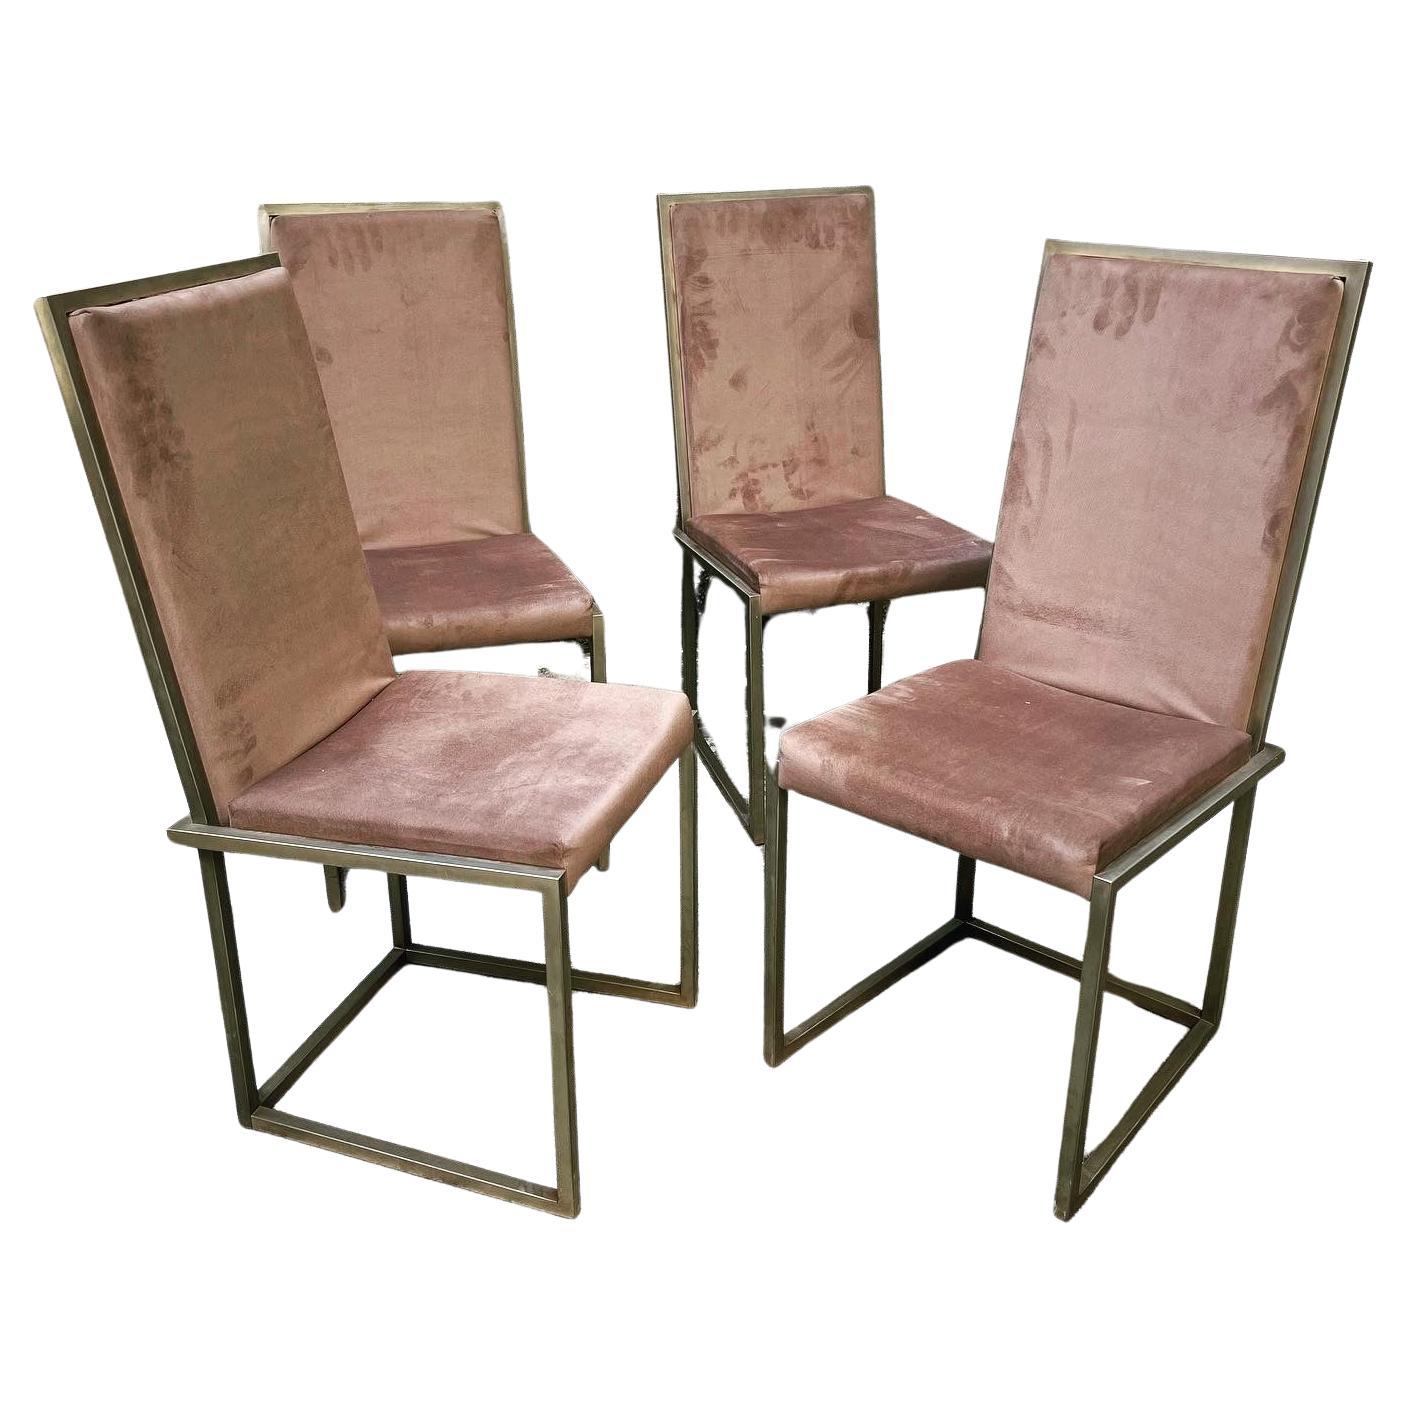 Italian Chairs - 1980s - Set of 4 For Sale